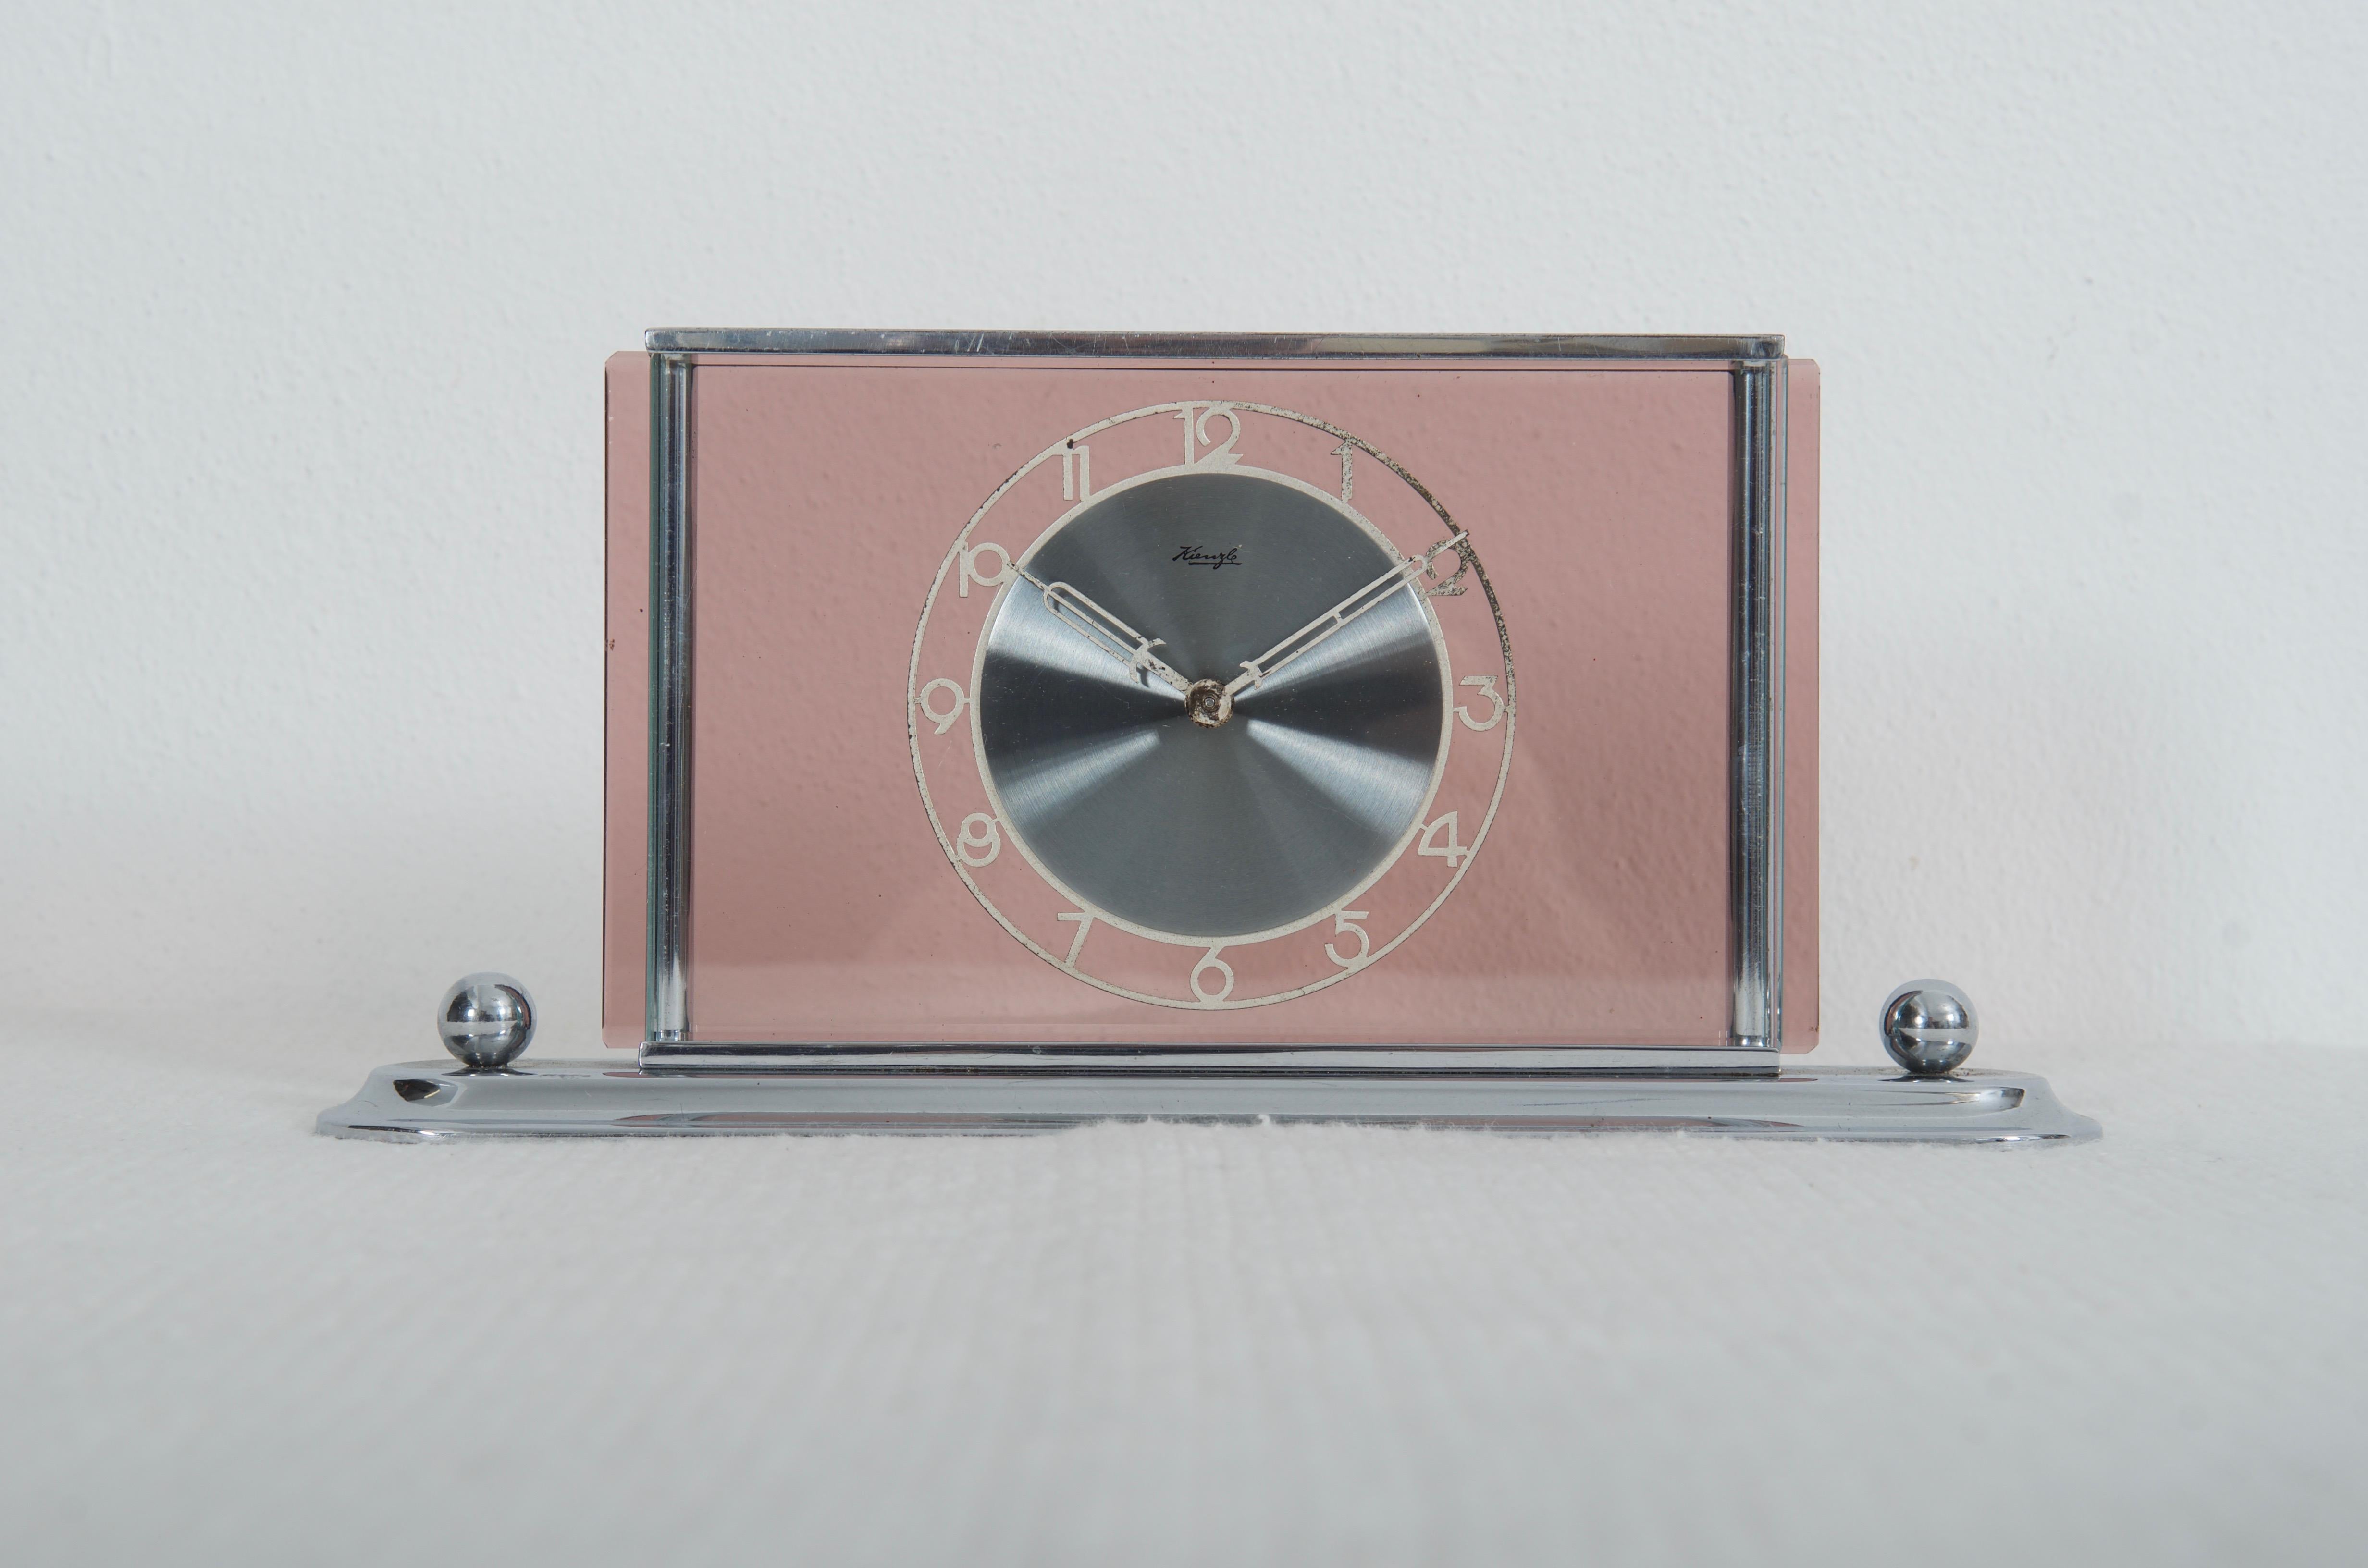 Brass frame nickel plated clock face made of polished steel and fixed on pink colored glass made by Kienzl in the late, 1930s. Fitted with a mechanical movement. On request can be rebuild to battery one.
 